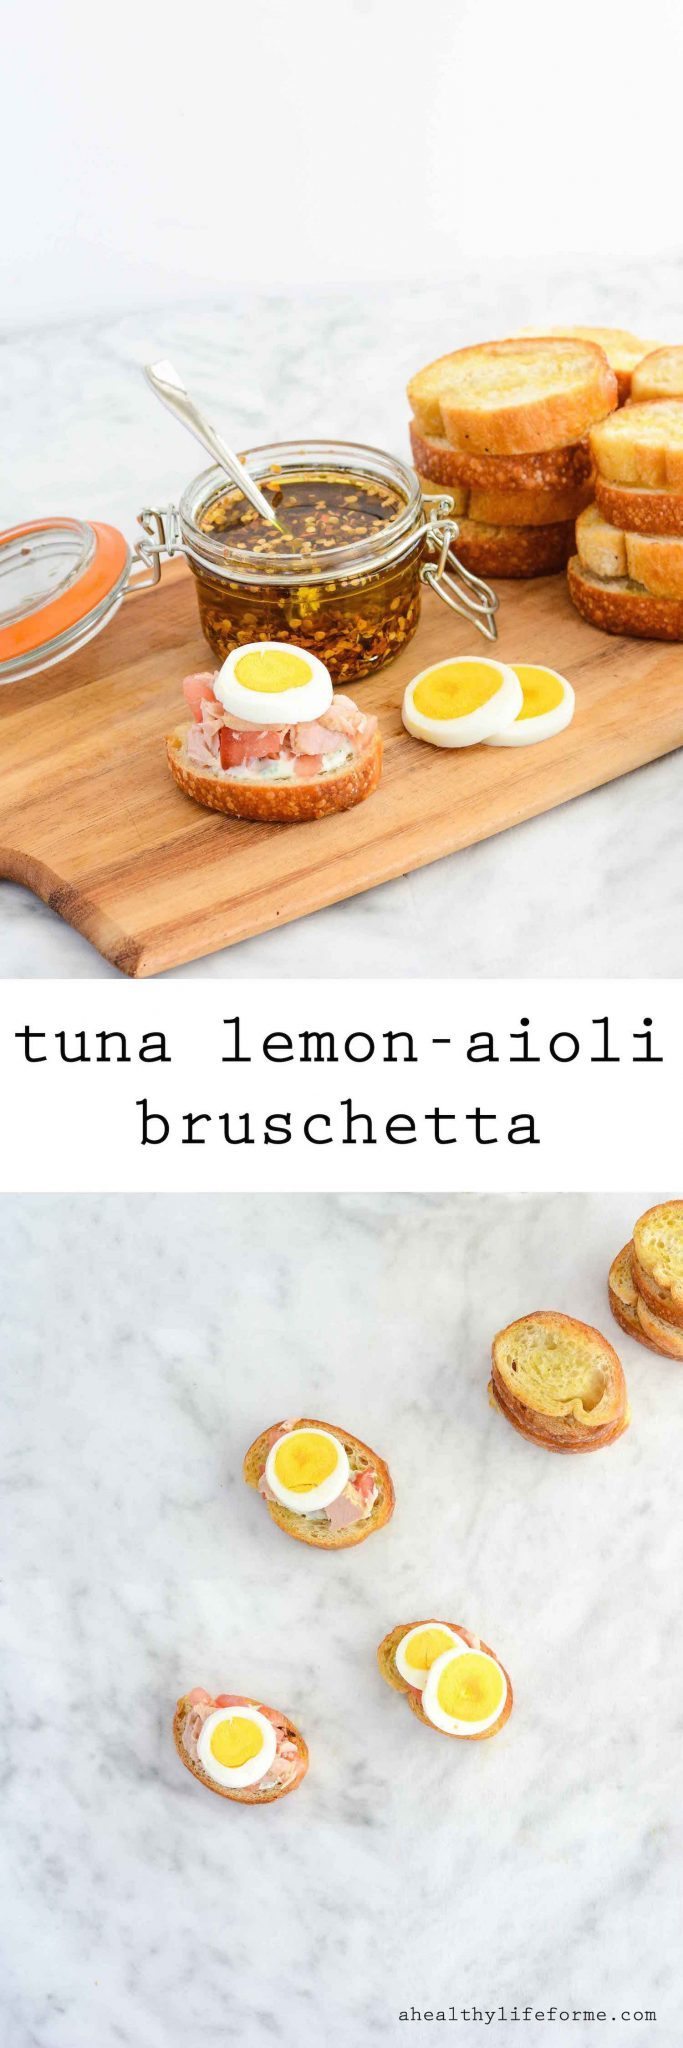 Bruschetta with tuna and egg topping.